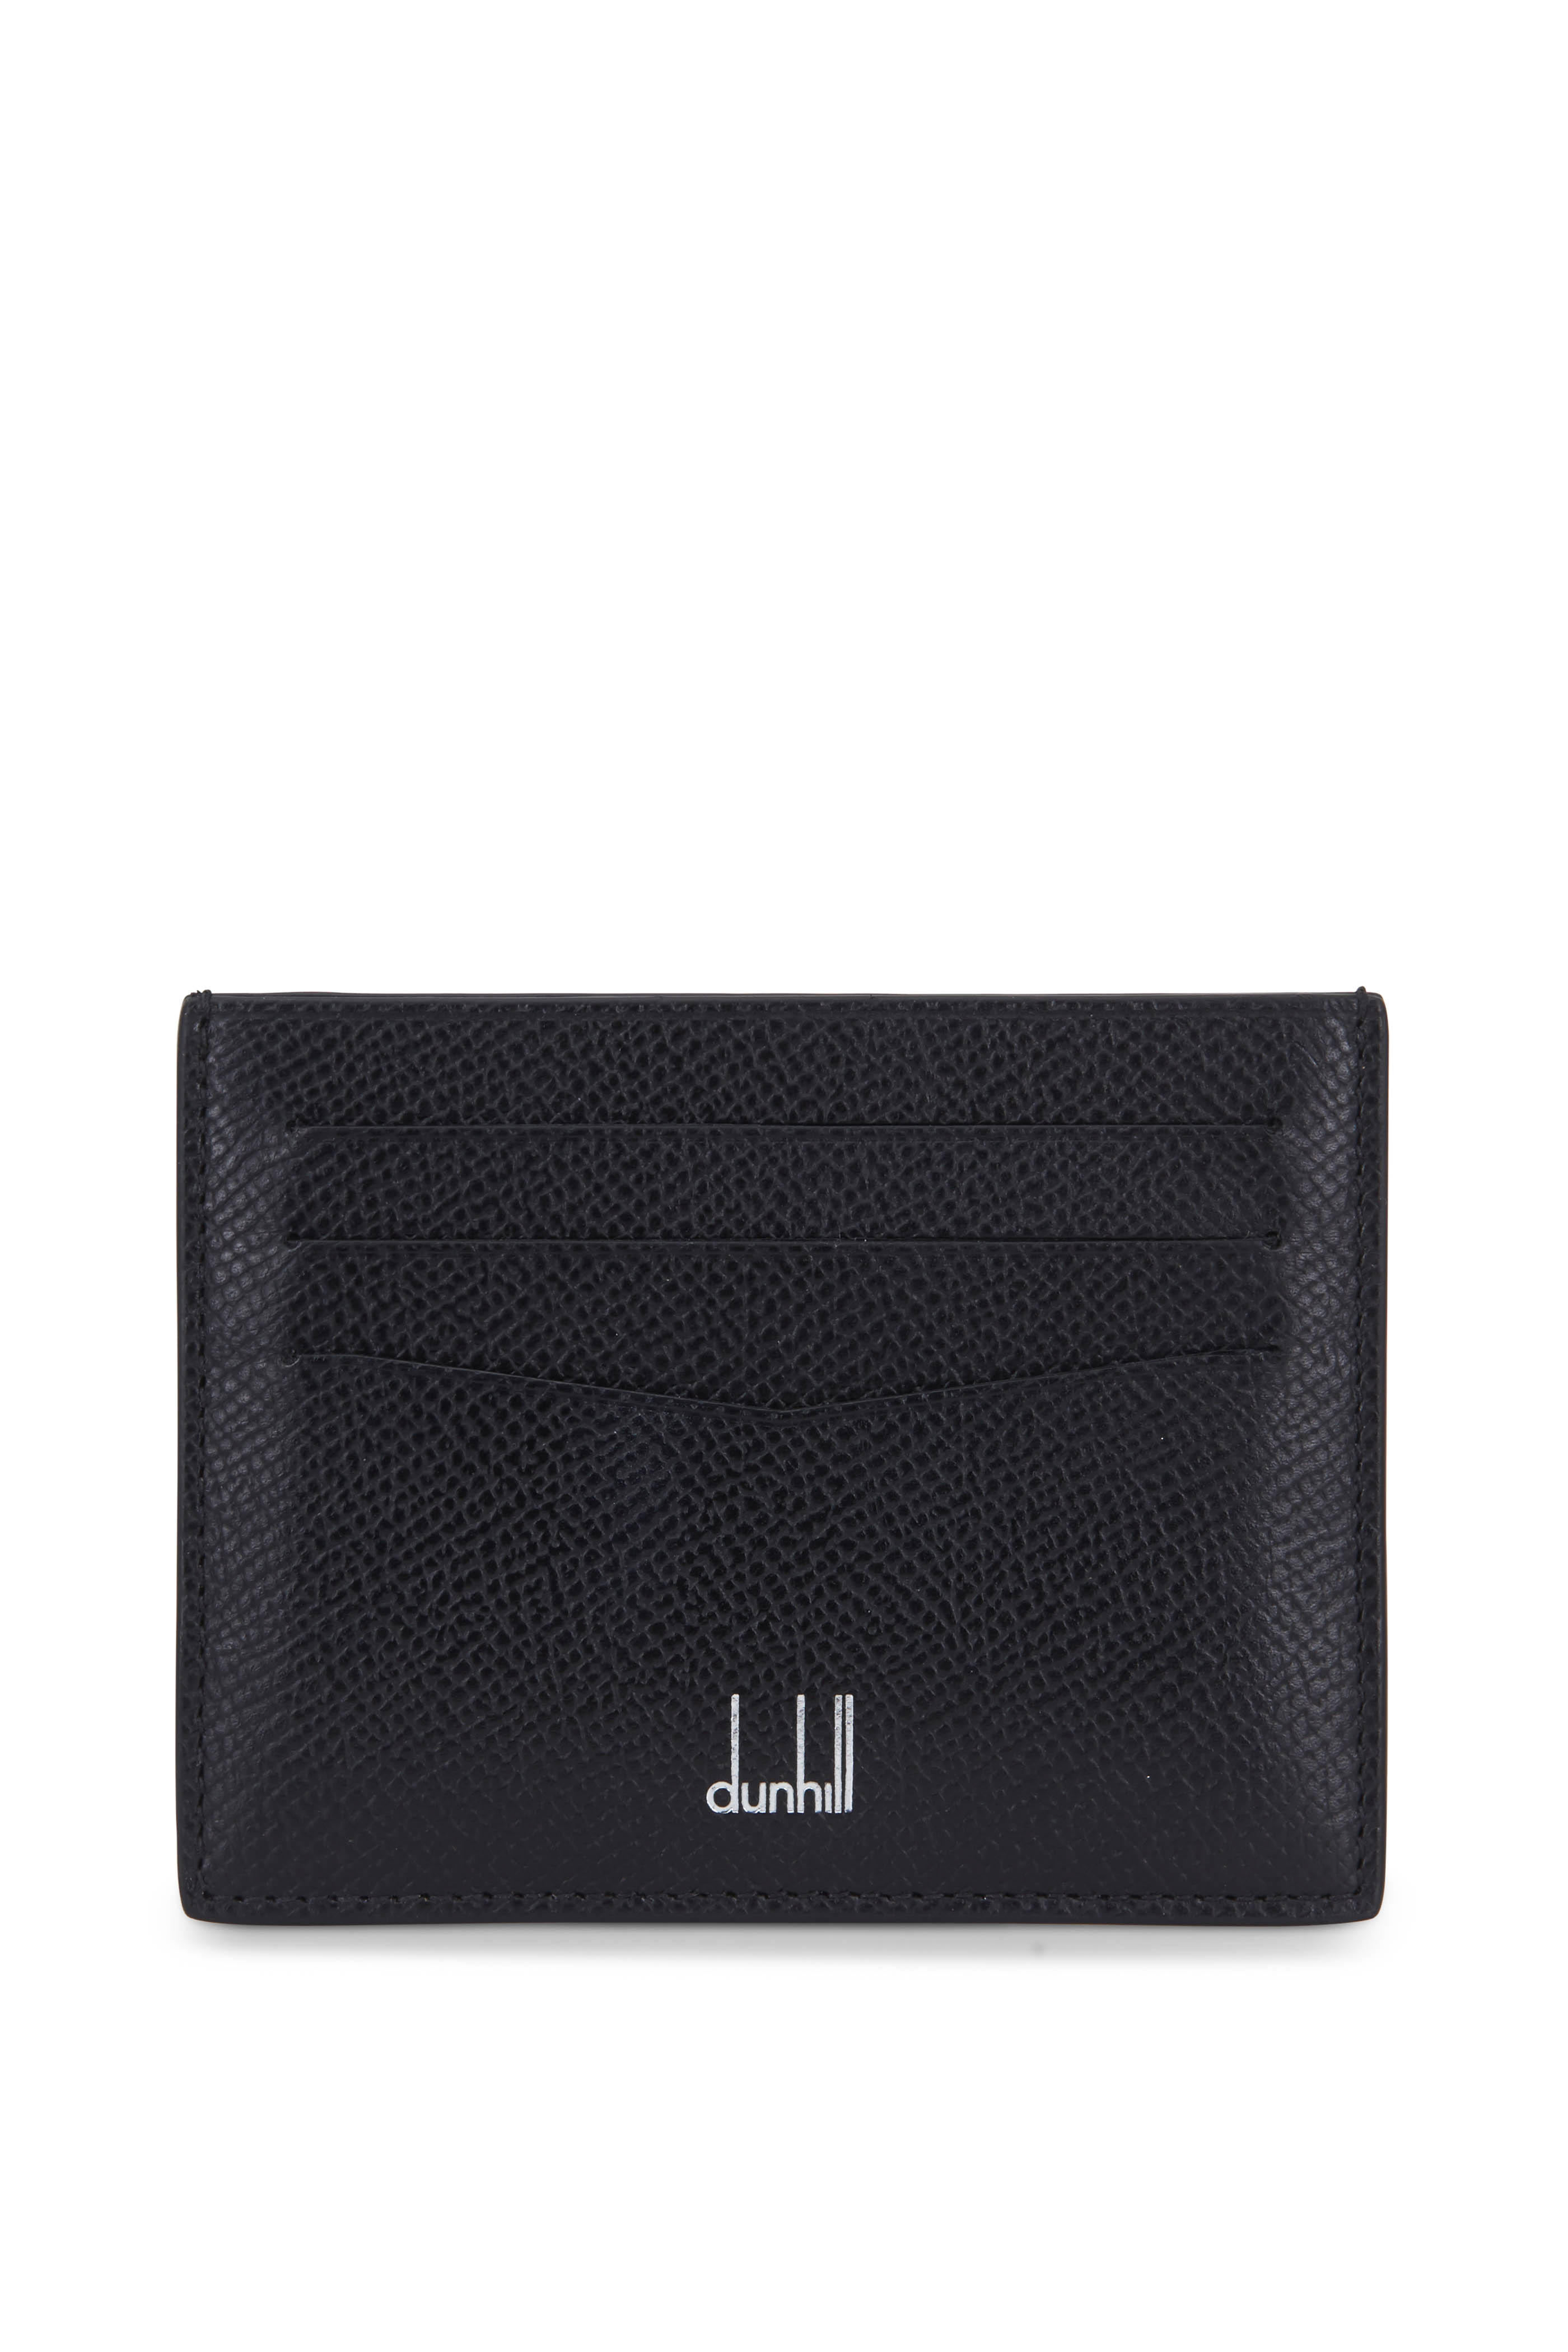 dunhill leather